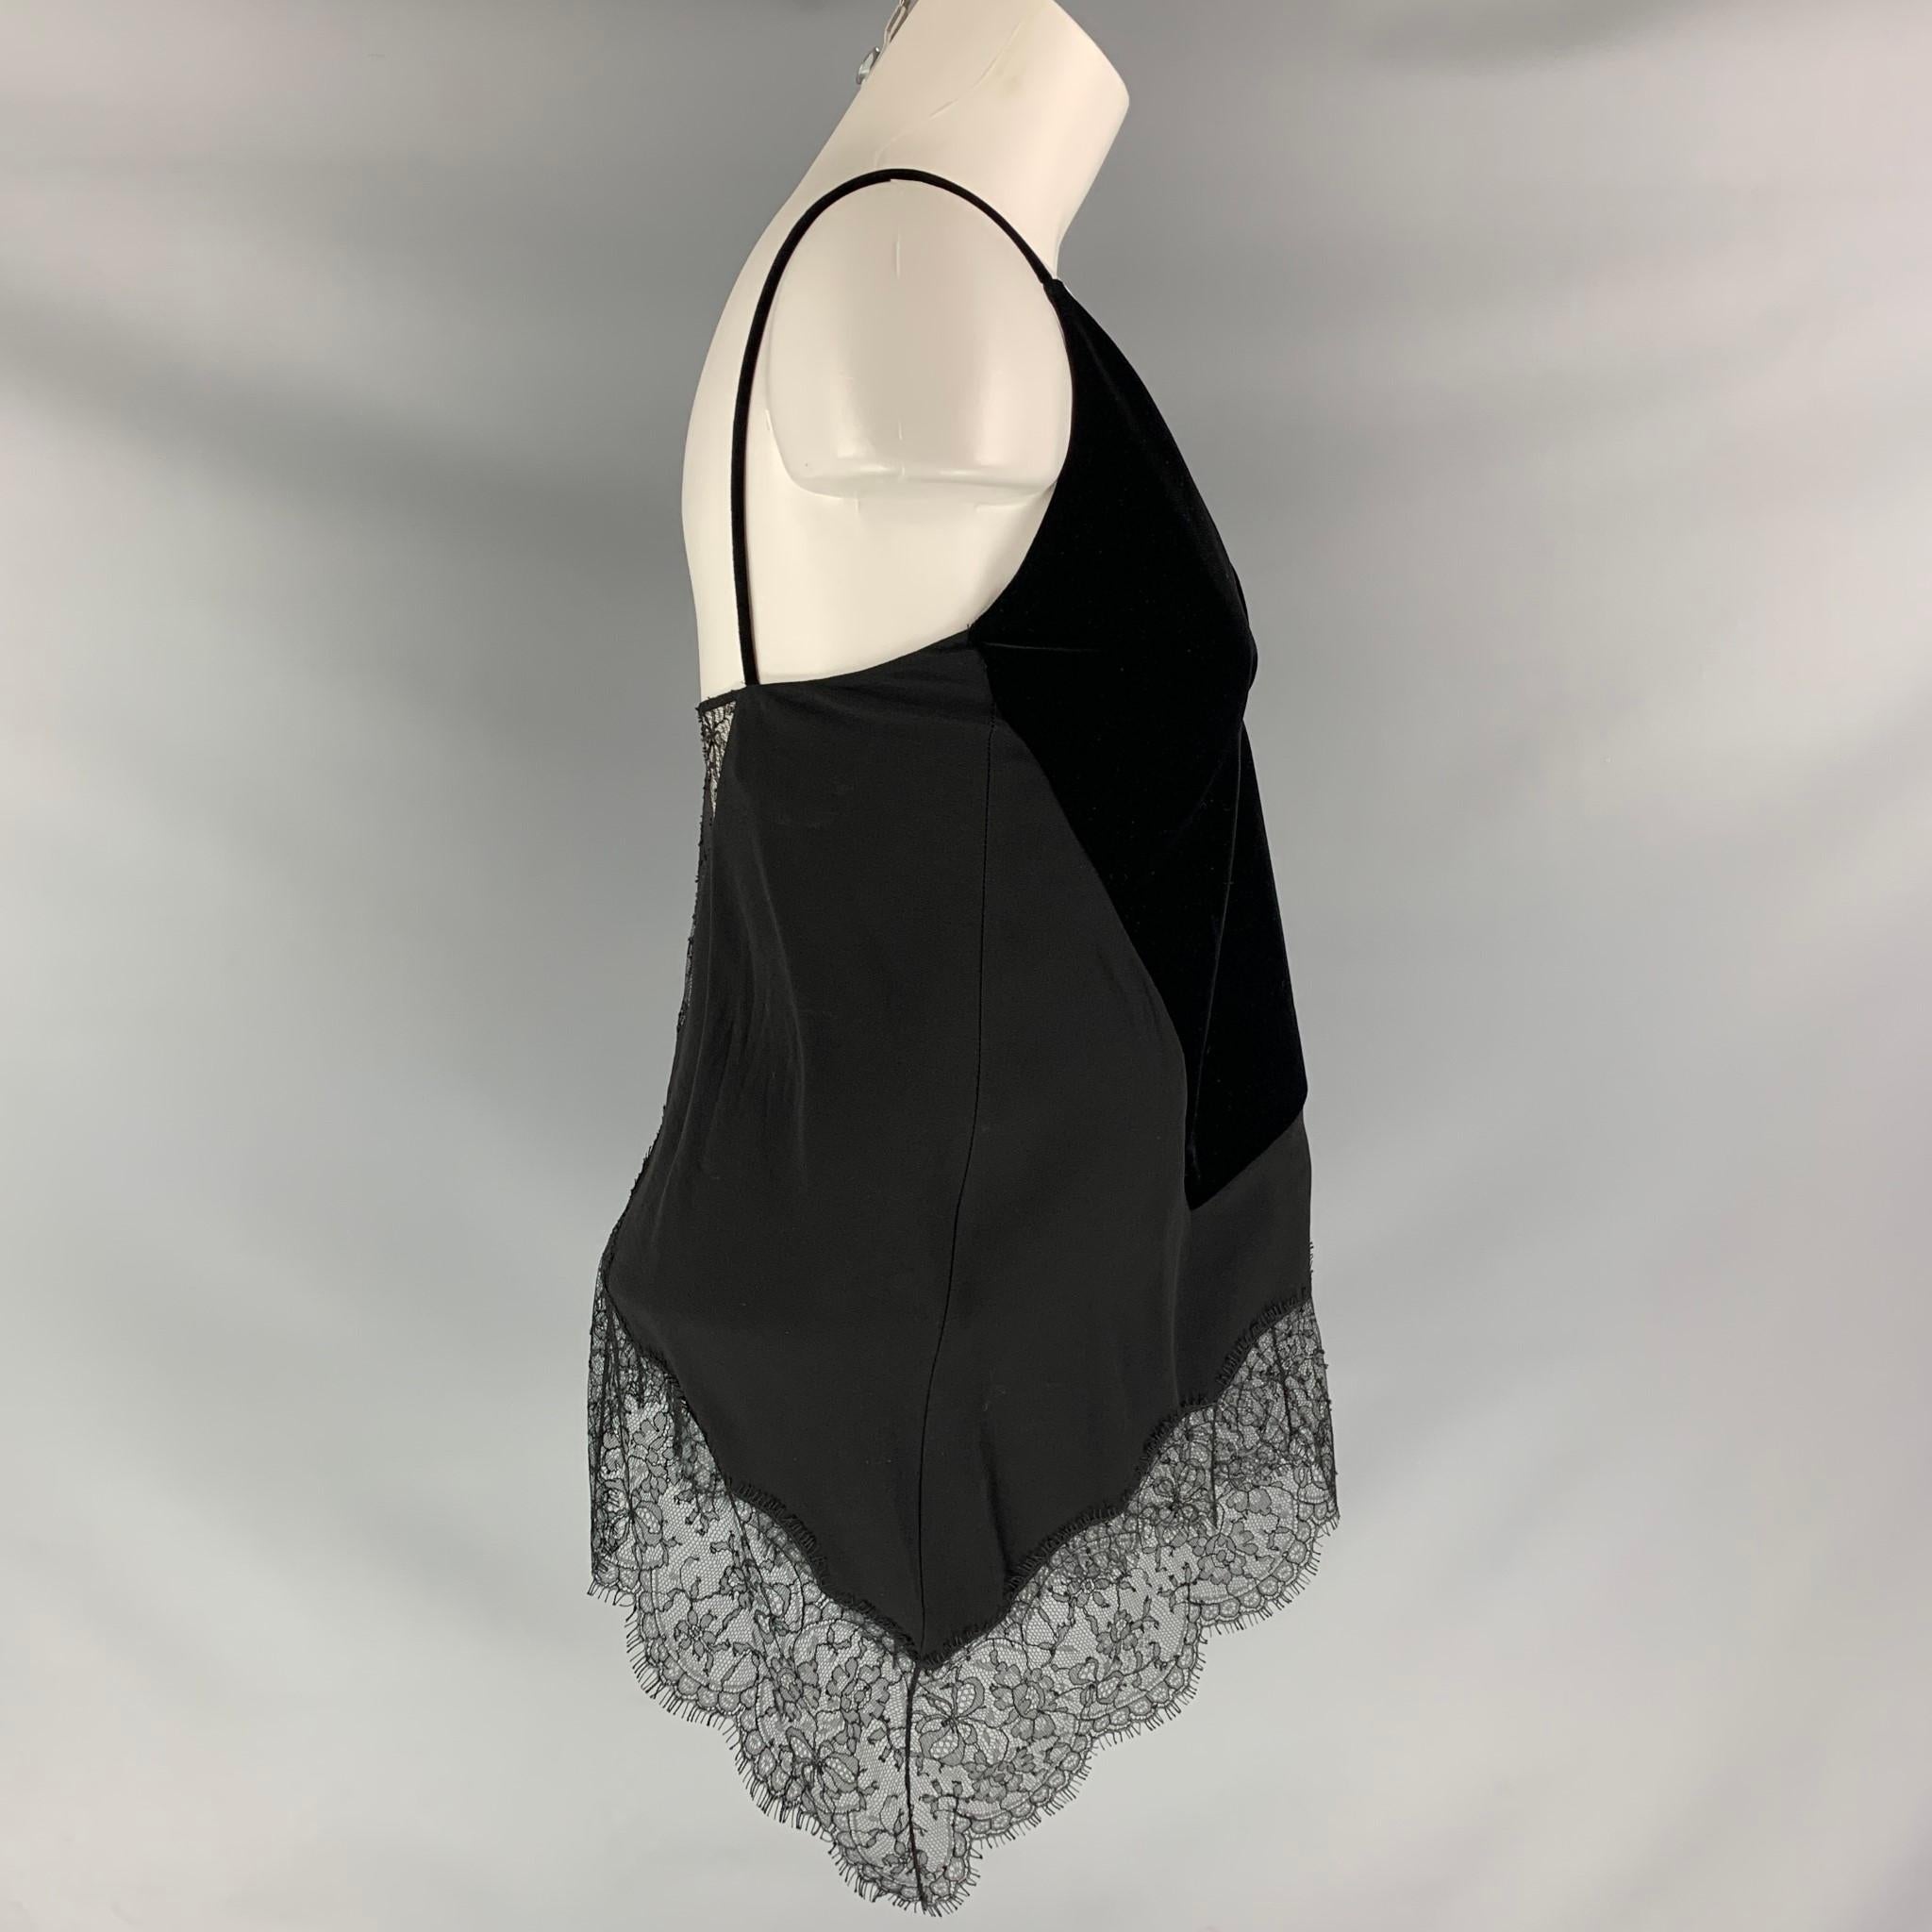 GIVENCHY V- neck dress top comes in black viscose and velvet fabrics, silk lined features lace details.

Excellent Pre-Owned Condition.
Marked: 34

Measurements:

Bust: 32 in
Front Length: 14 in
Back Length: 13 in
SKU: 111314
Category: Dress